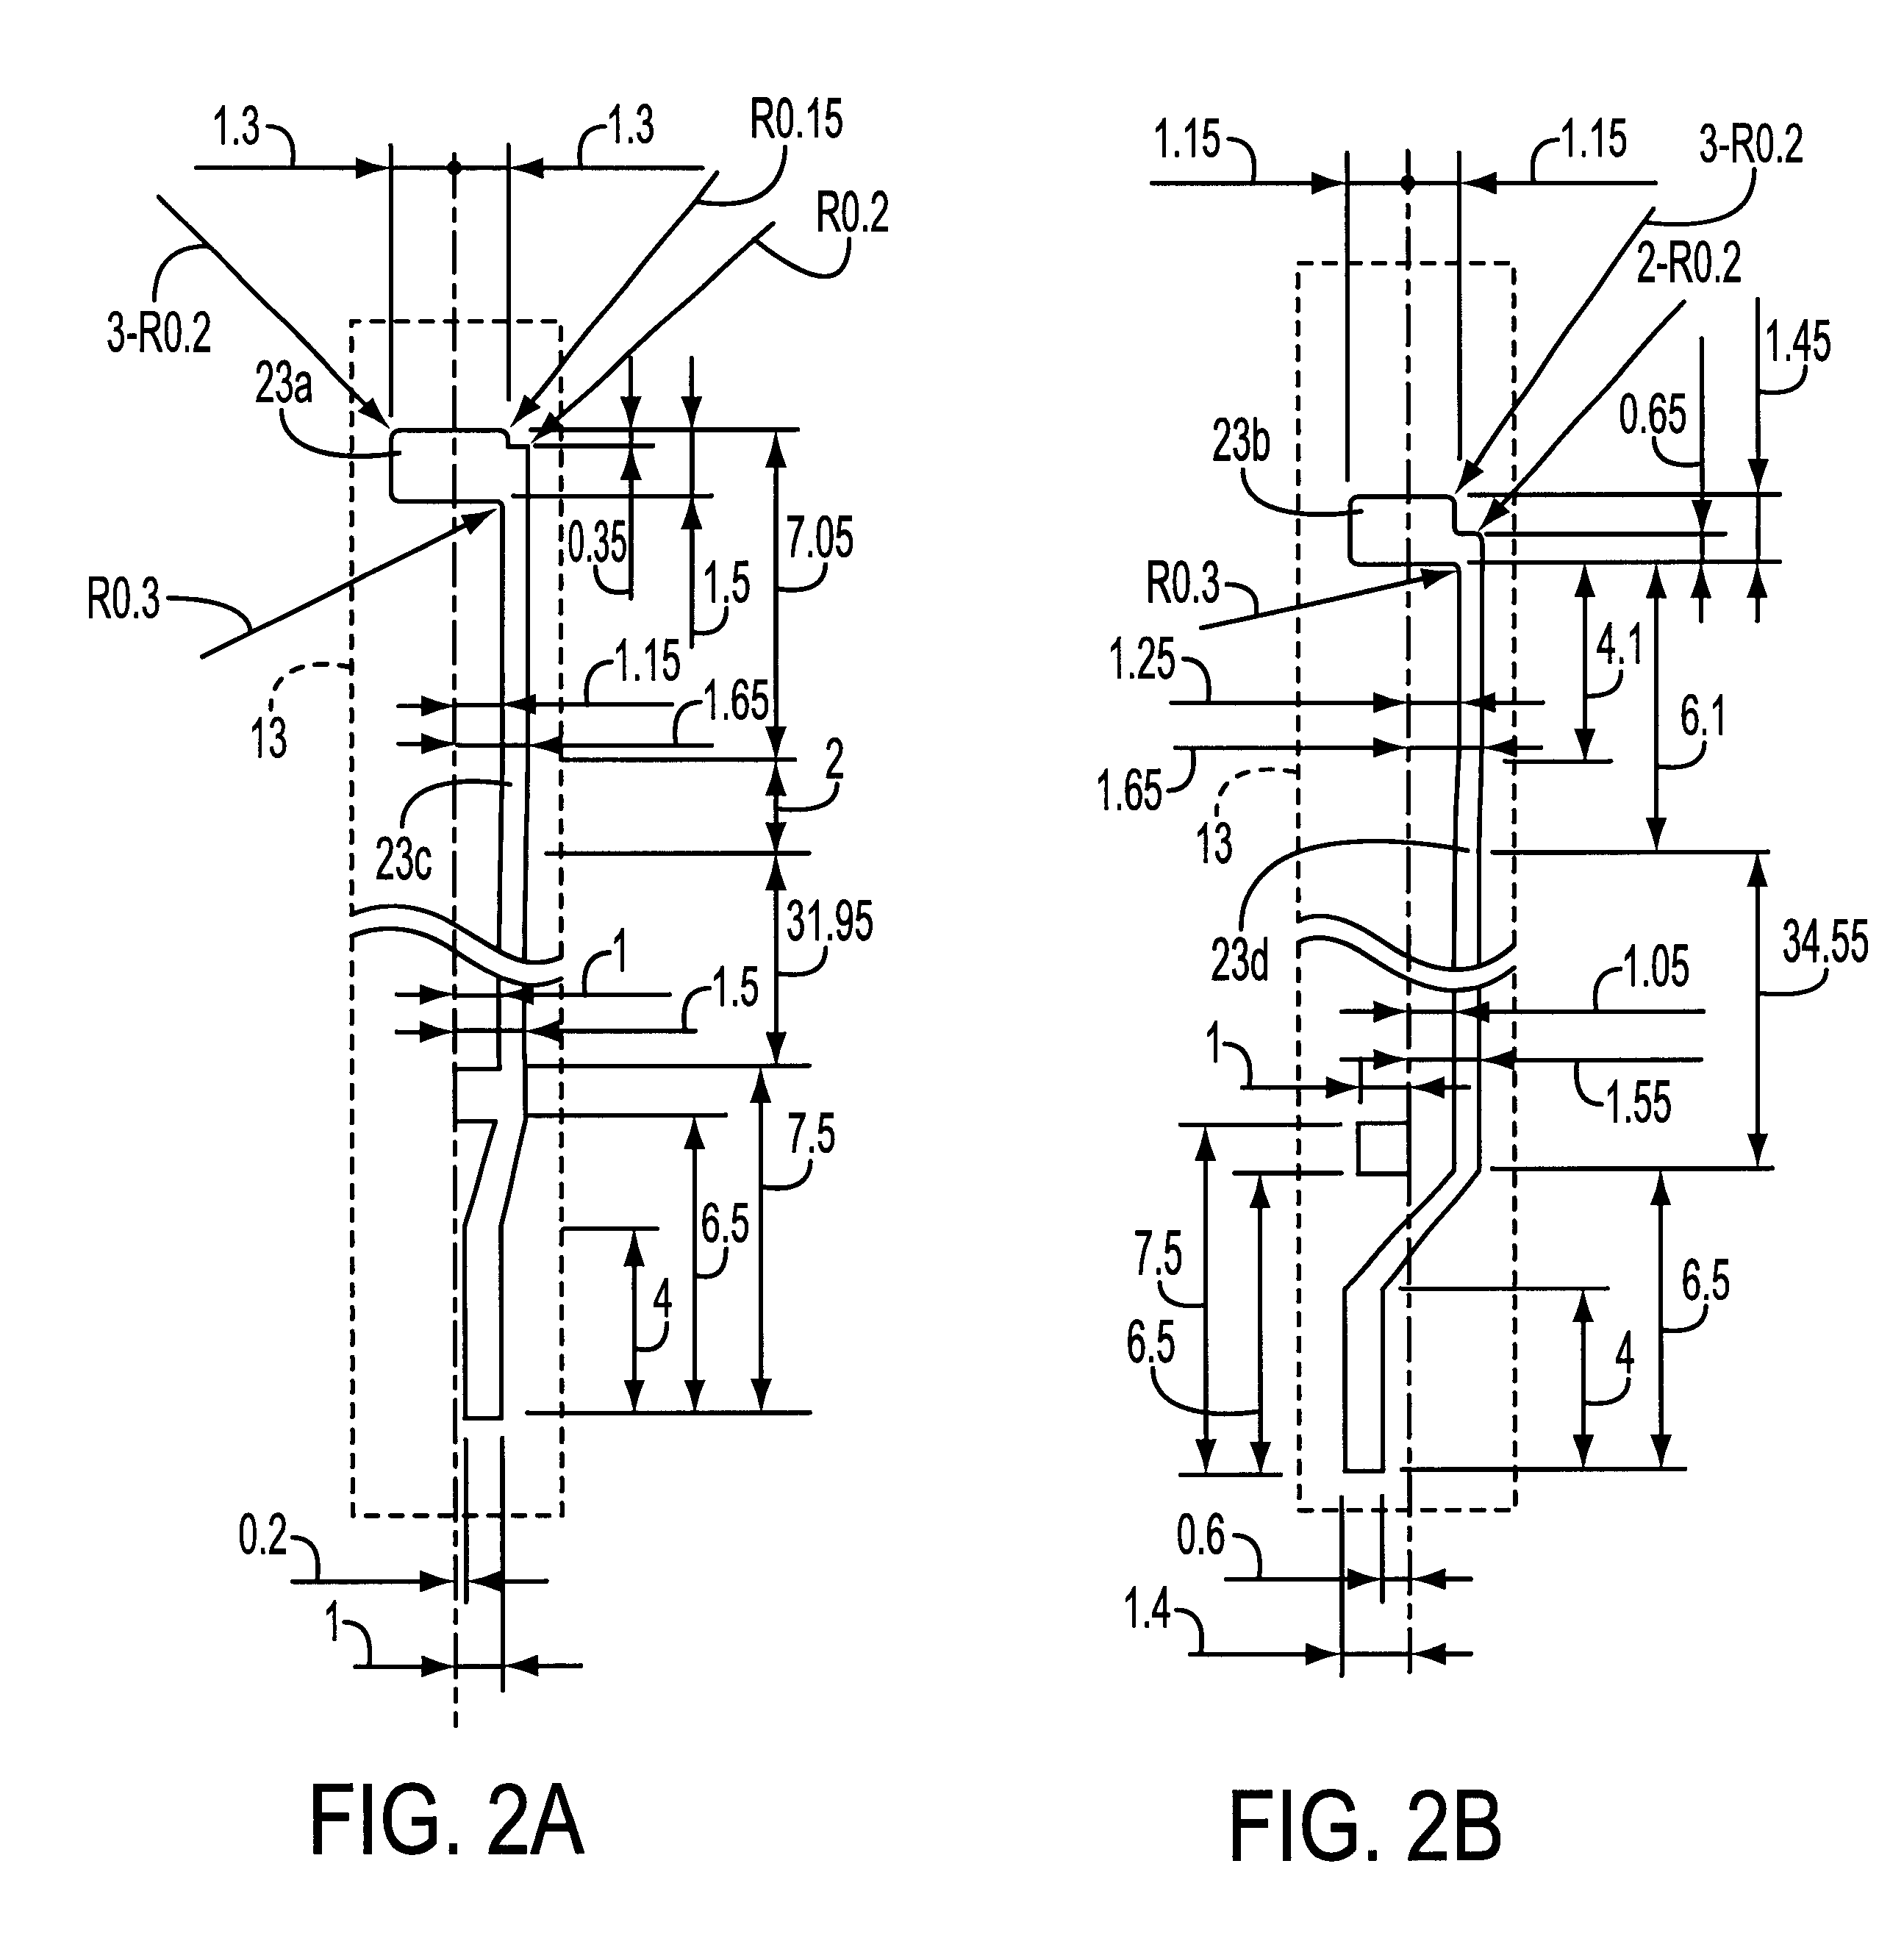 Gas sensor with a high combined resistance to lead wire resistance ratio